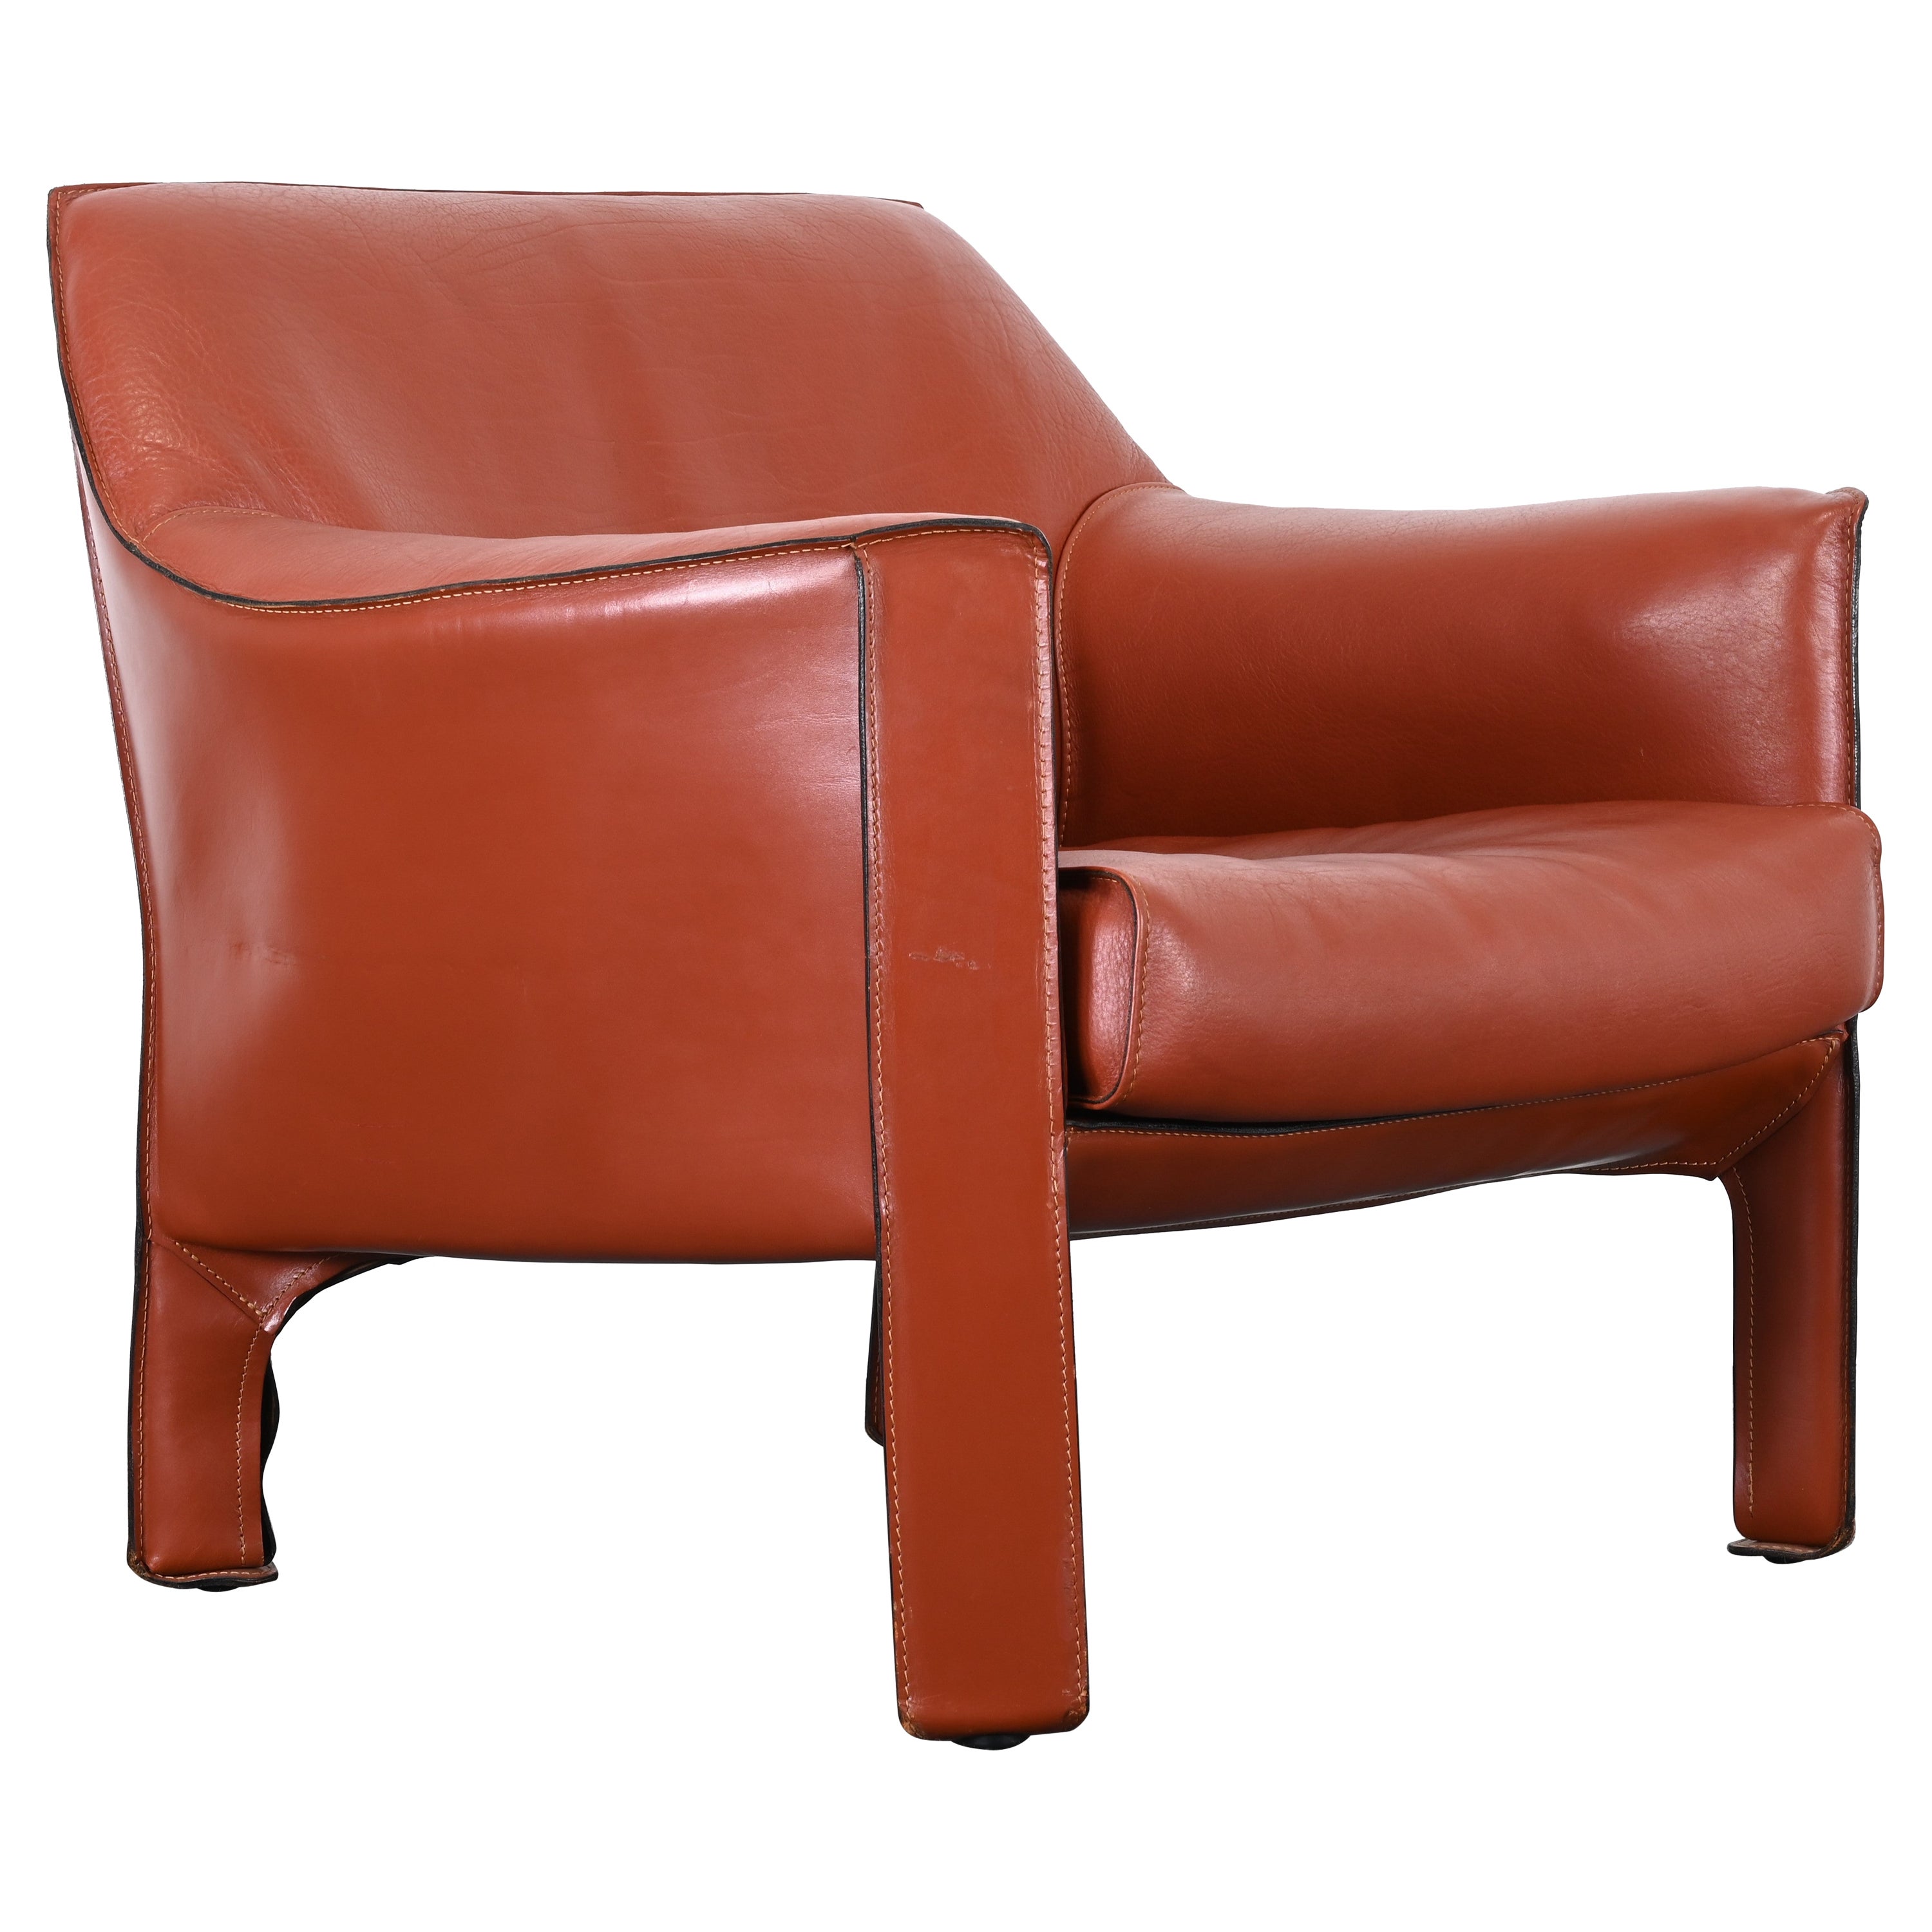 Cassina Cab Chair 415 Designed by Mario Bellini, No Longer in Production